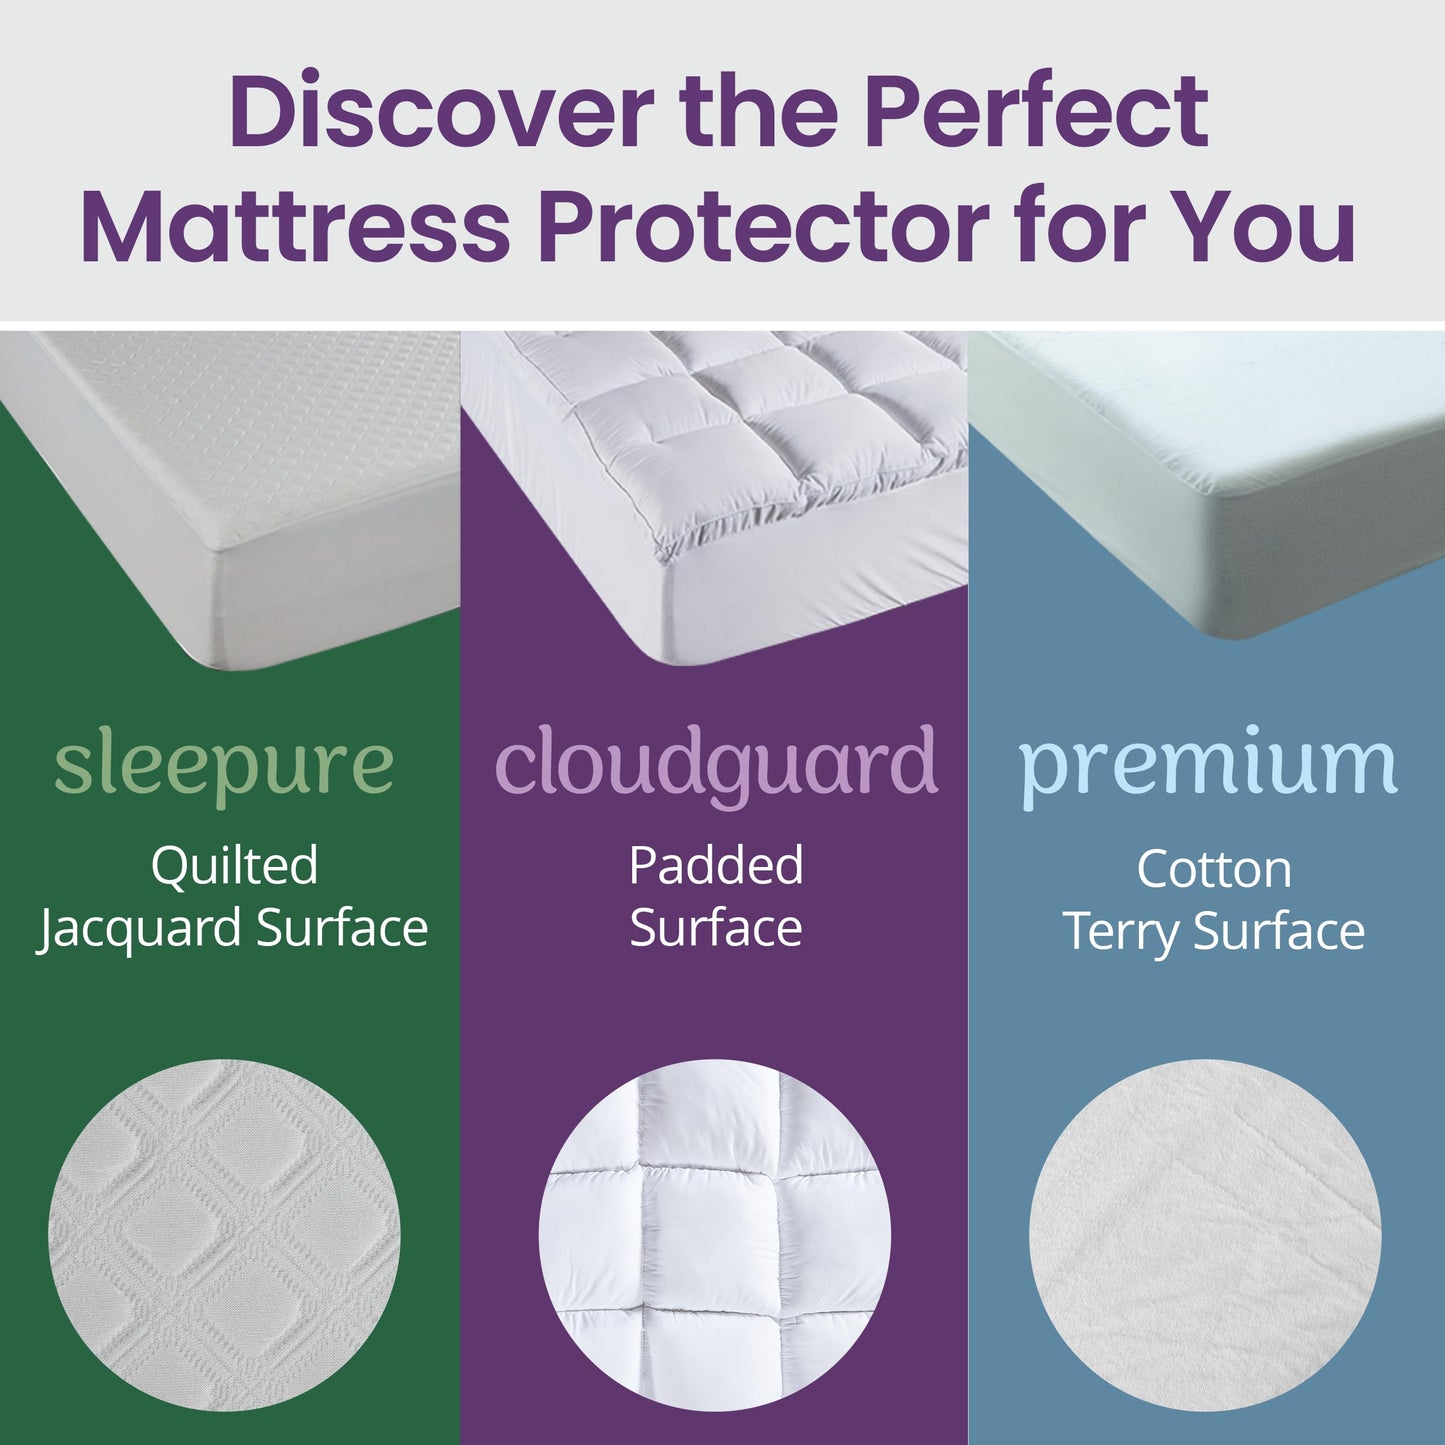 Mattress Cover - SafeRest 100% Waterproof King Size Mattress Protector - Fitted with Stretchable Pockets - Machine Washable Cotton Mattress Cover for Bed - Perfect Bedding Airbnb Essentials for Hosts